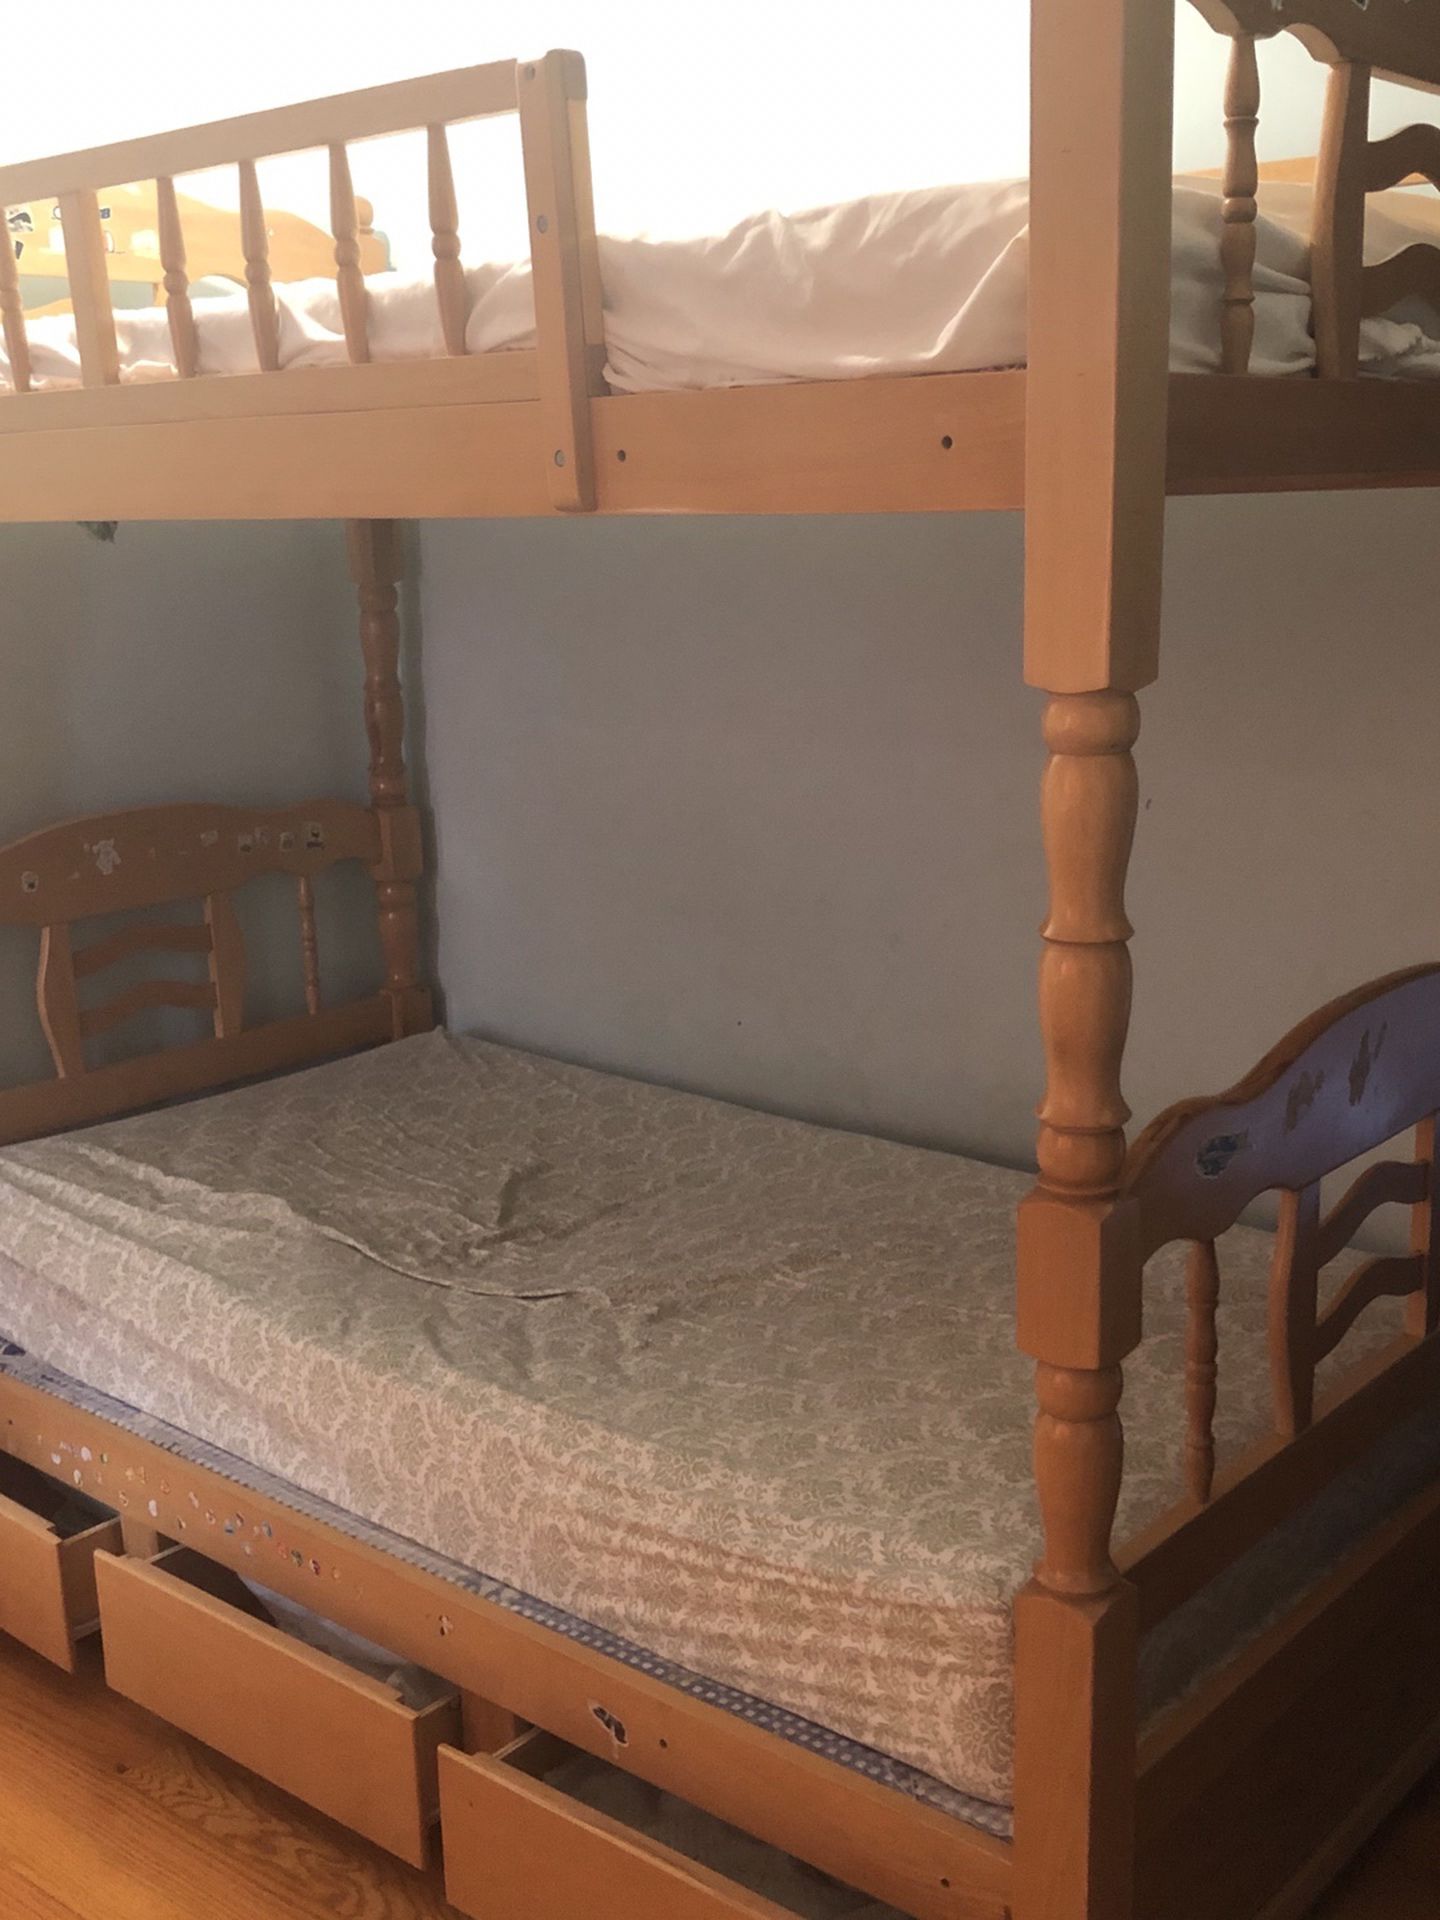 FREE Solid Wood Bunk Bed & Mattresses. Great Condition!